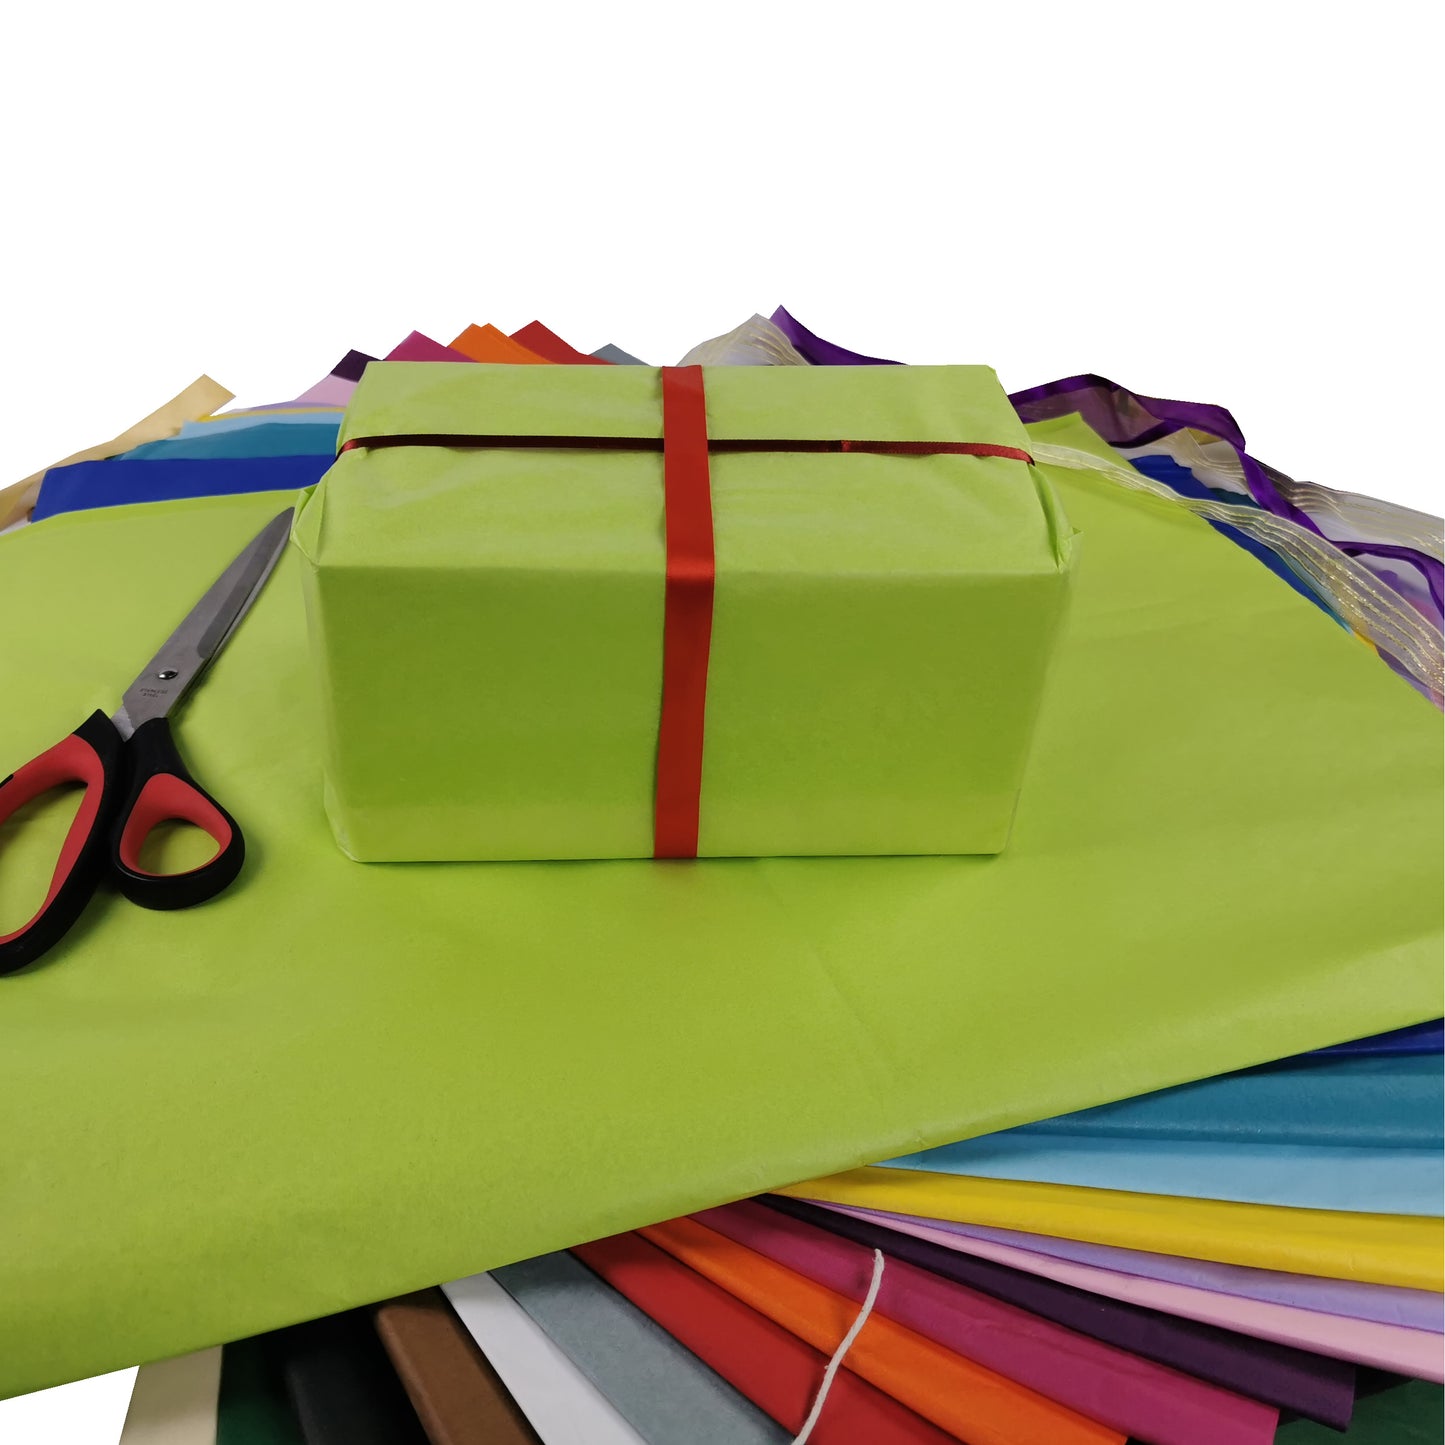 Tissue Paper Sheets 50cm x 75cm 17gsm Lime Green